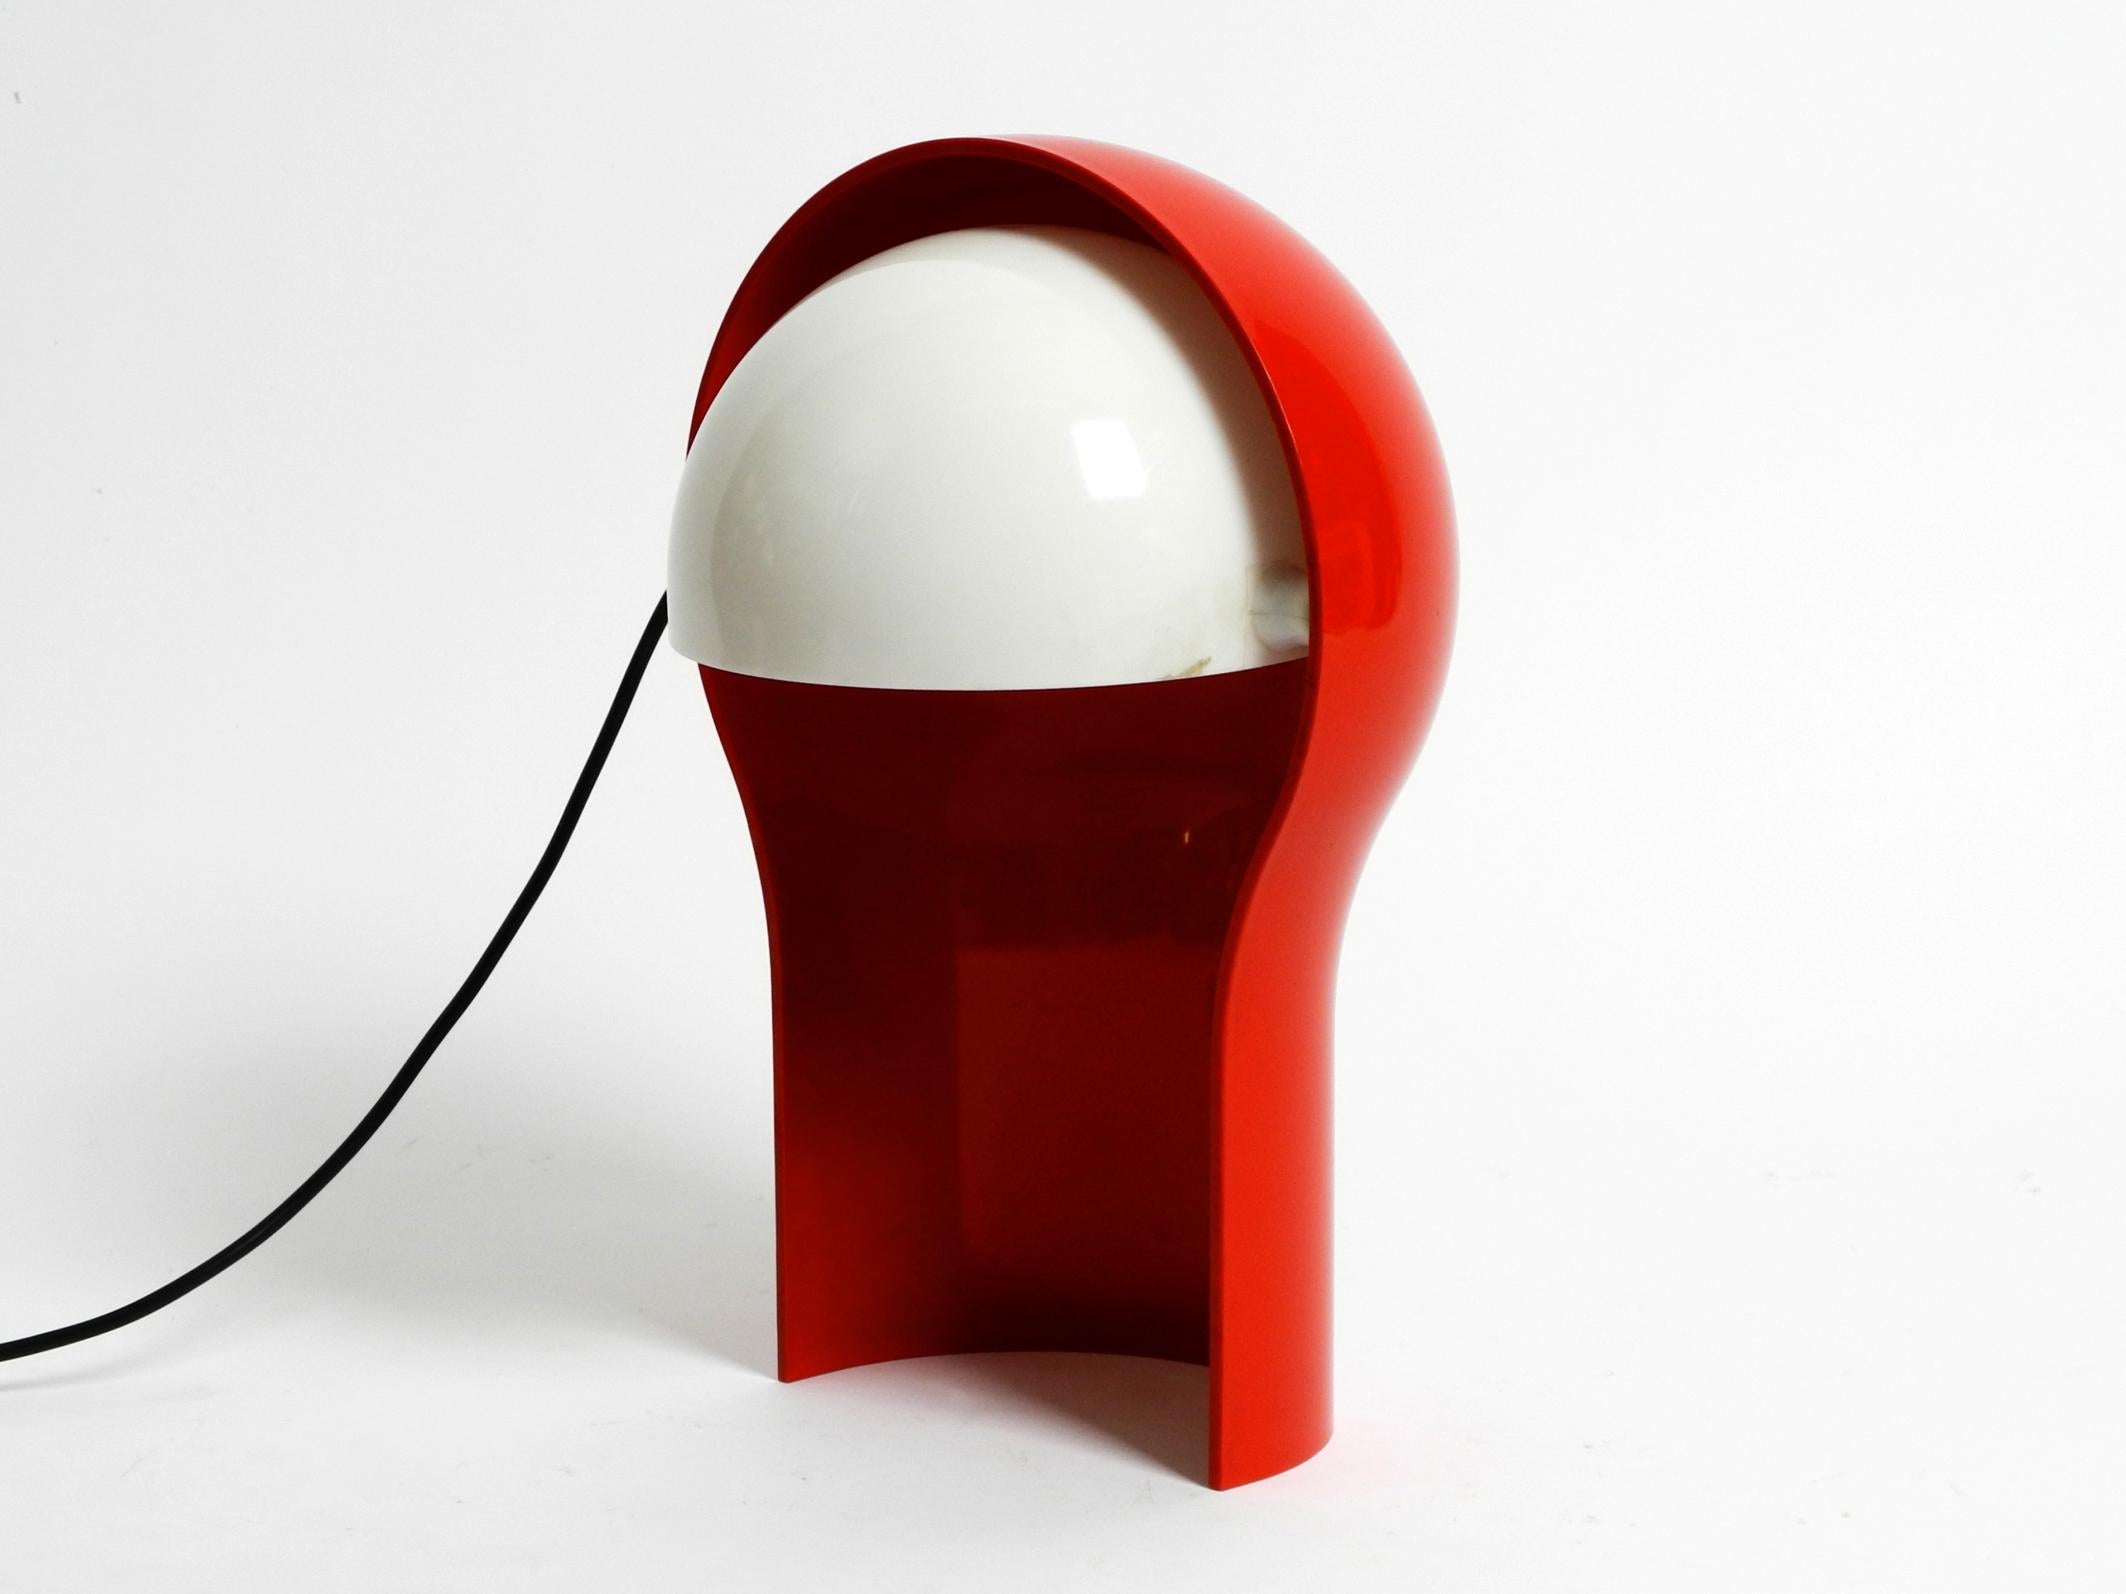 Space Age Telegono Table Lamp by Vico Magistretti for Artemide 1968 in Very Good Condition For Sale